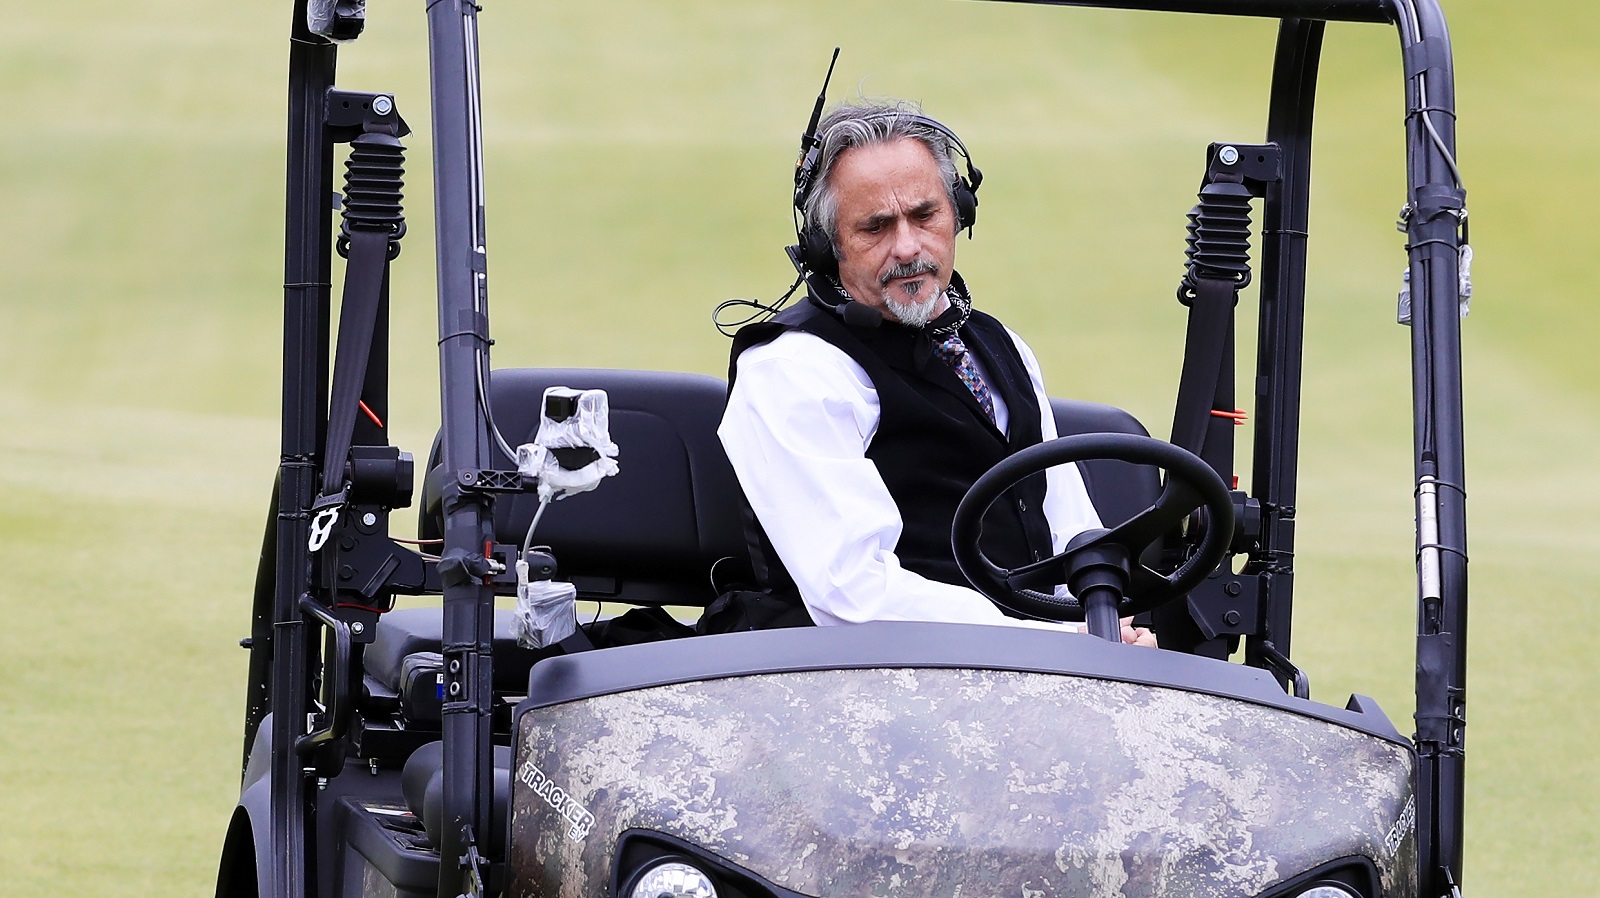 TV personality David Feherty looks on from an ATV during the Payne’s Valley Cup on Sept. 22, 2020, at Payne’s Valley course at Big Cedar Lodge in Ridgedale, Missouri.